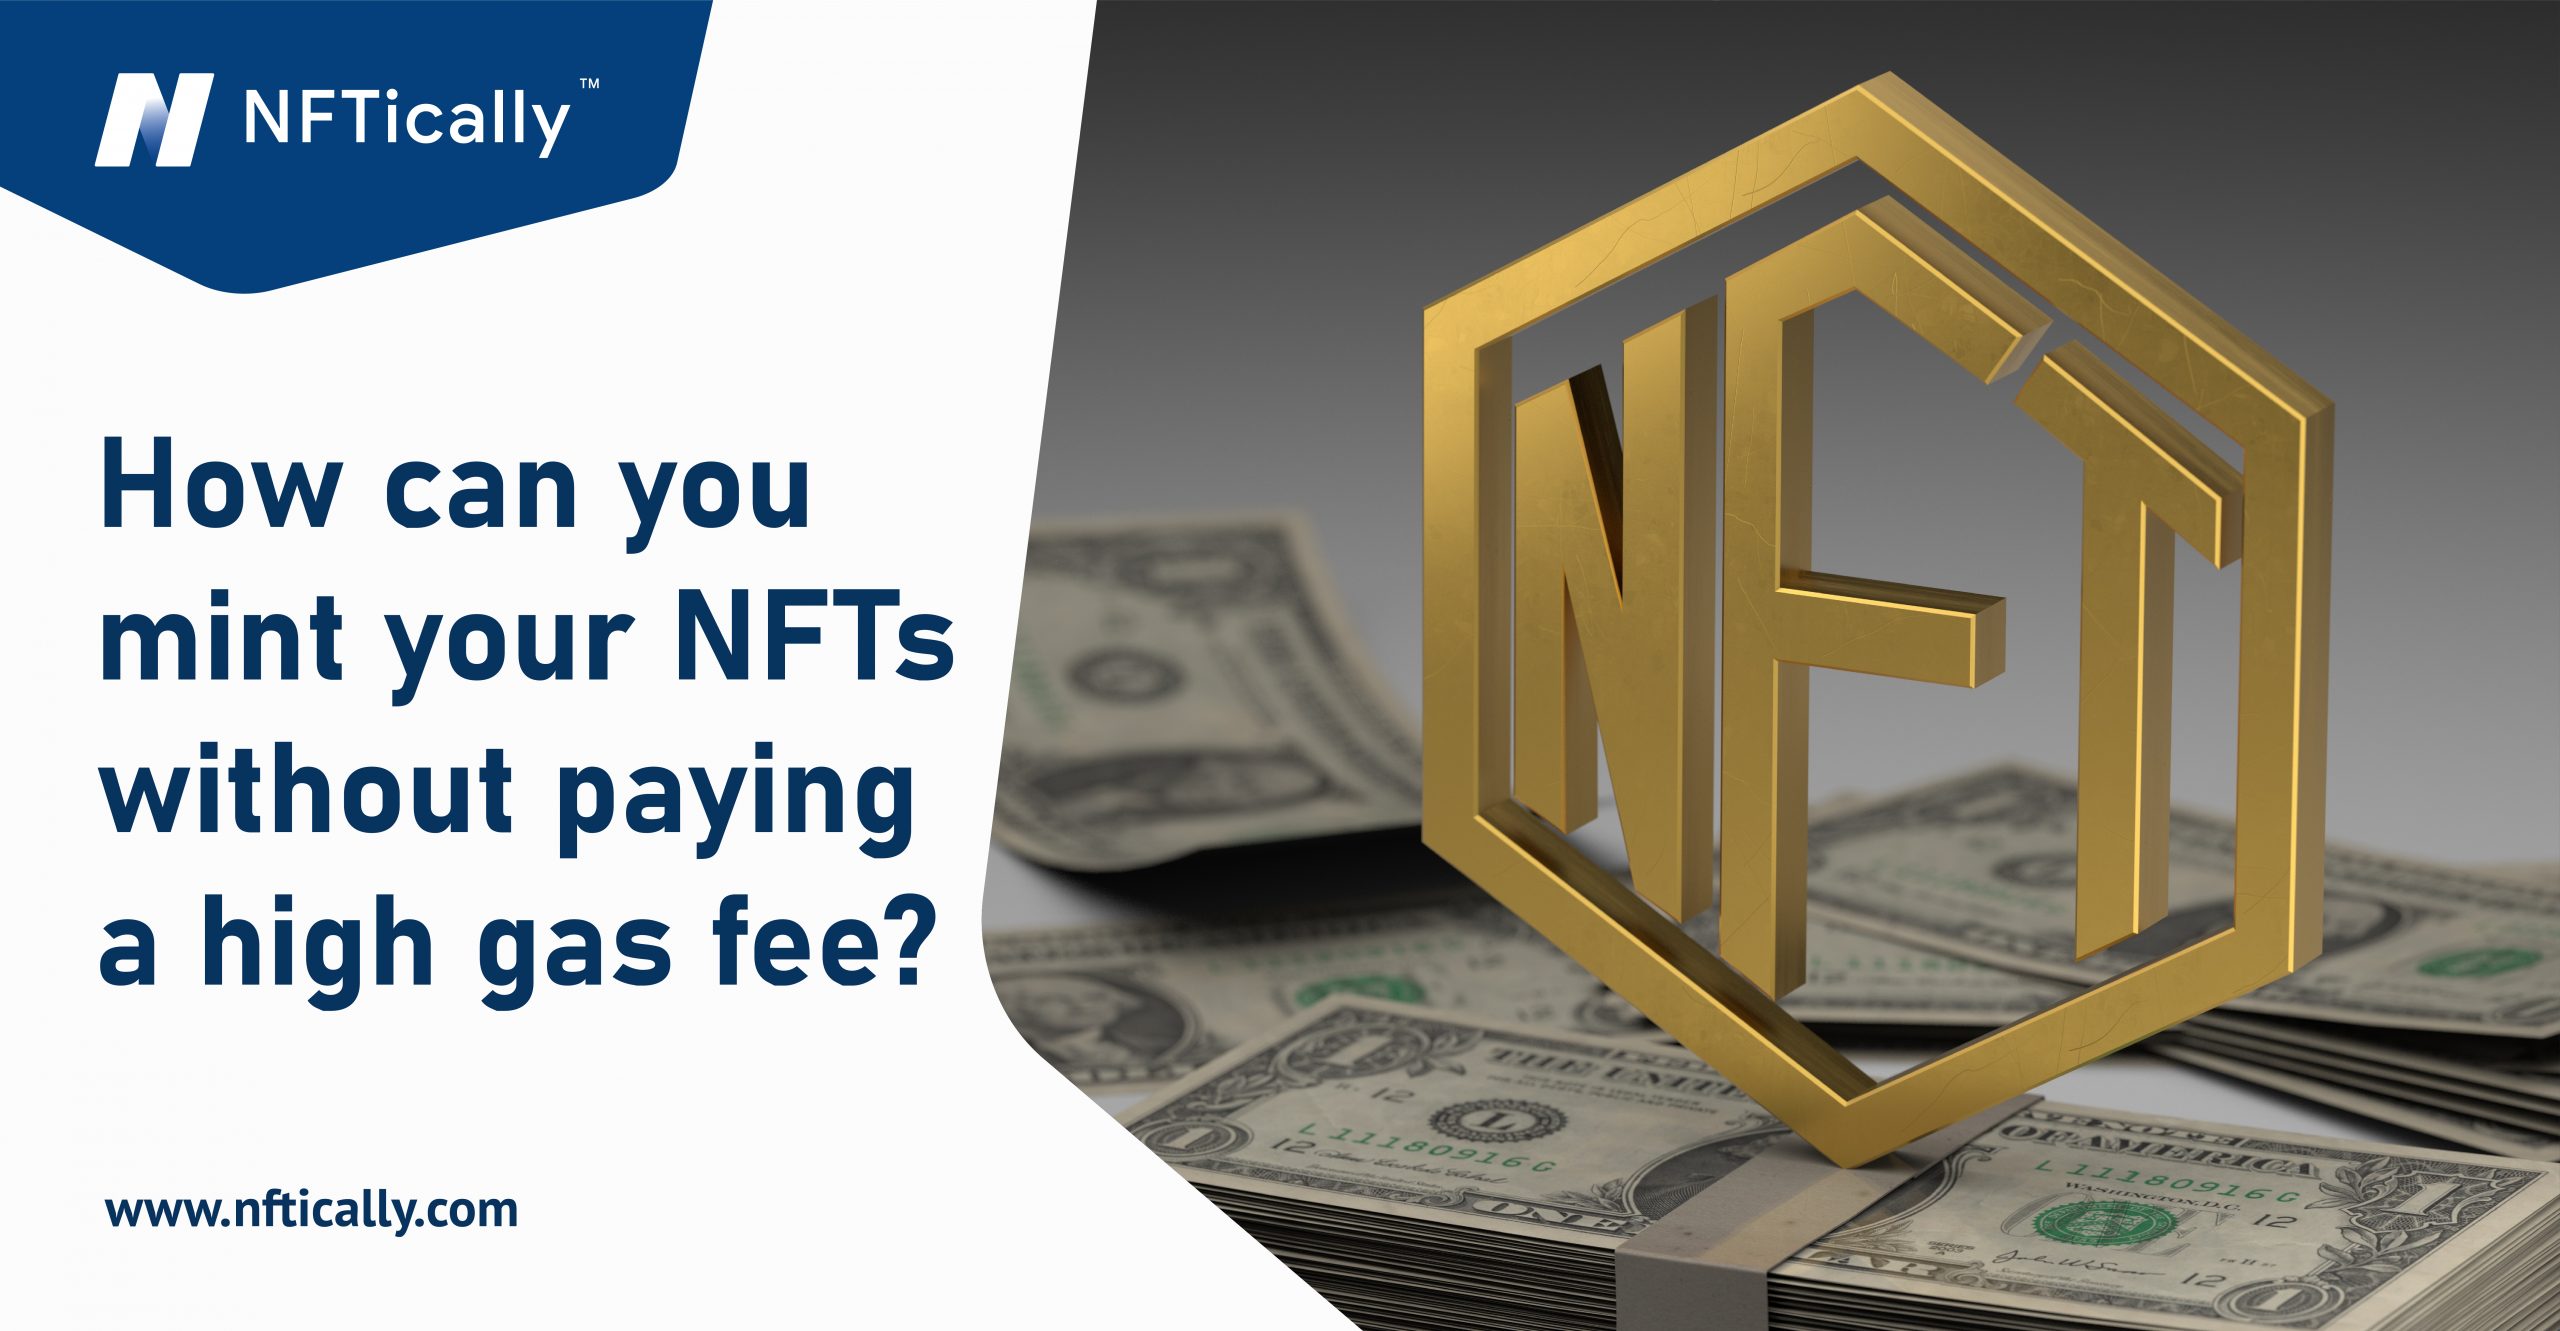 How can you mint your NFTs without paying a high gas fee?